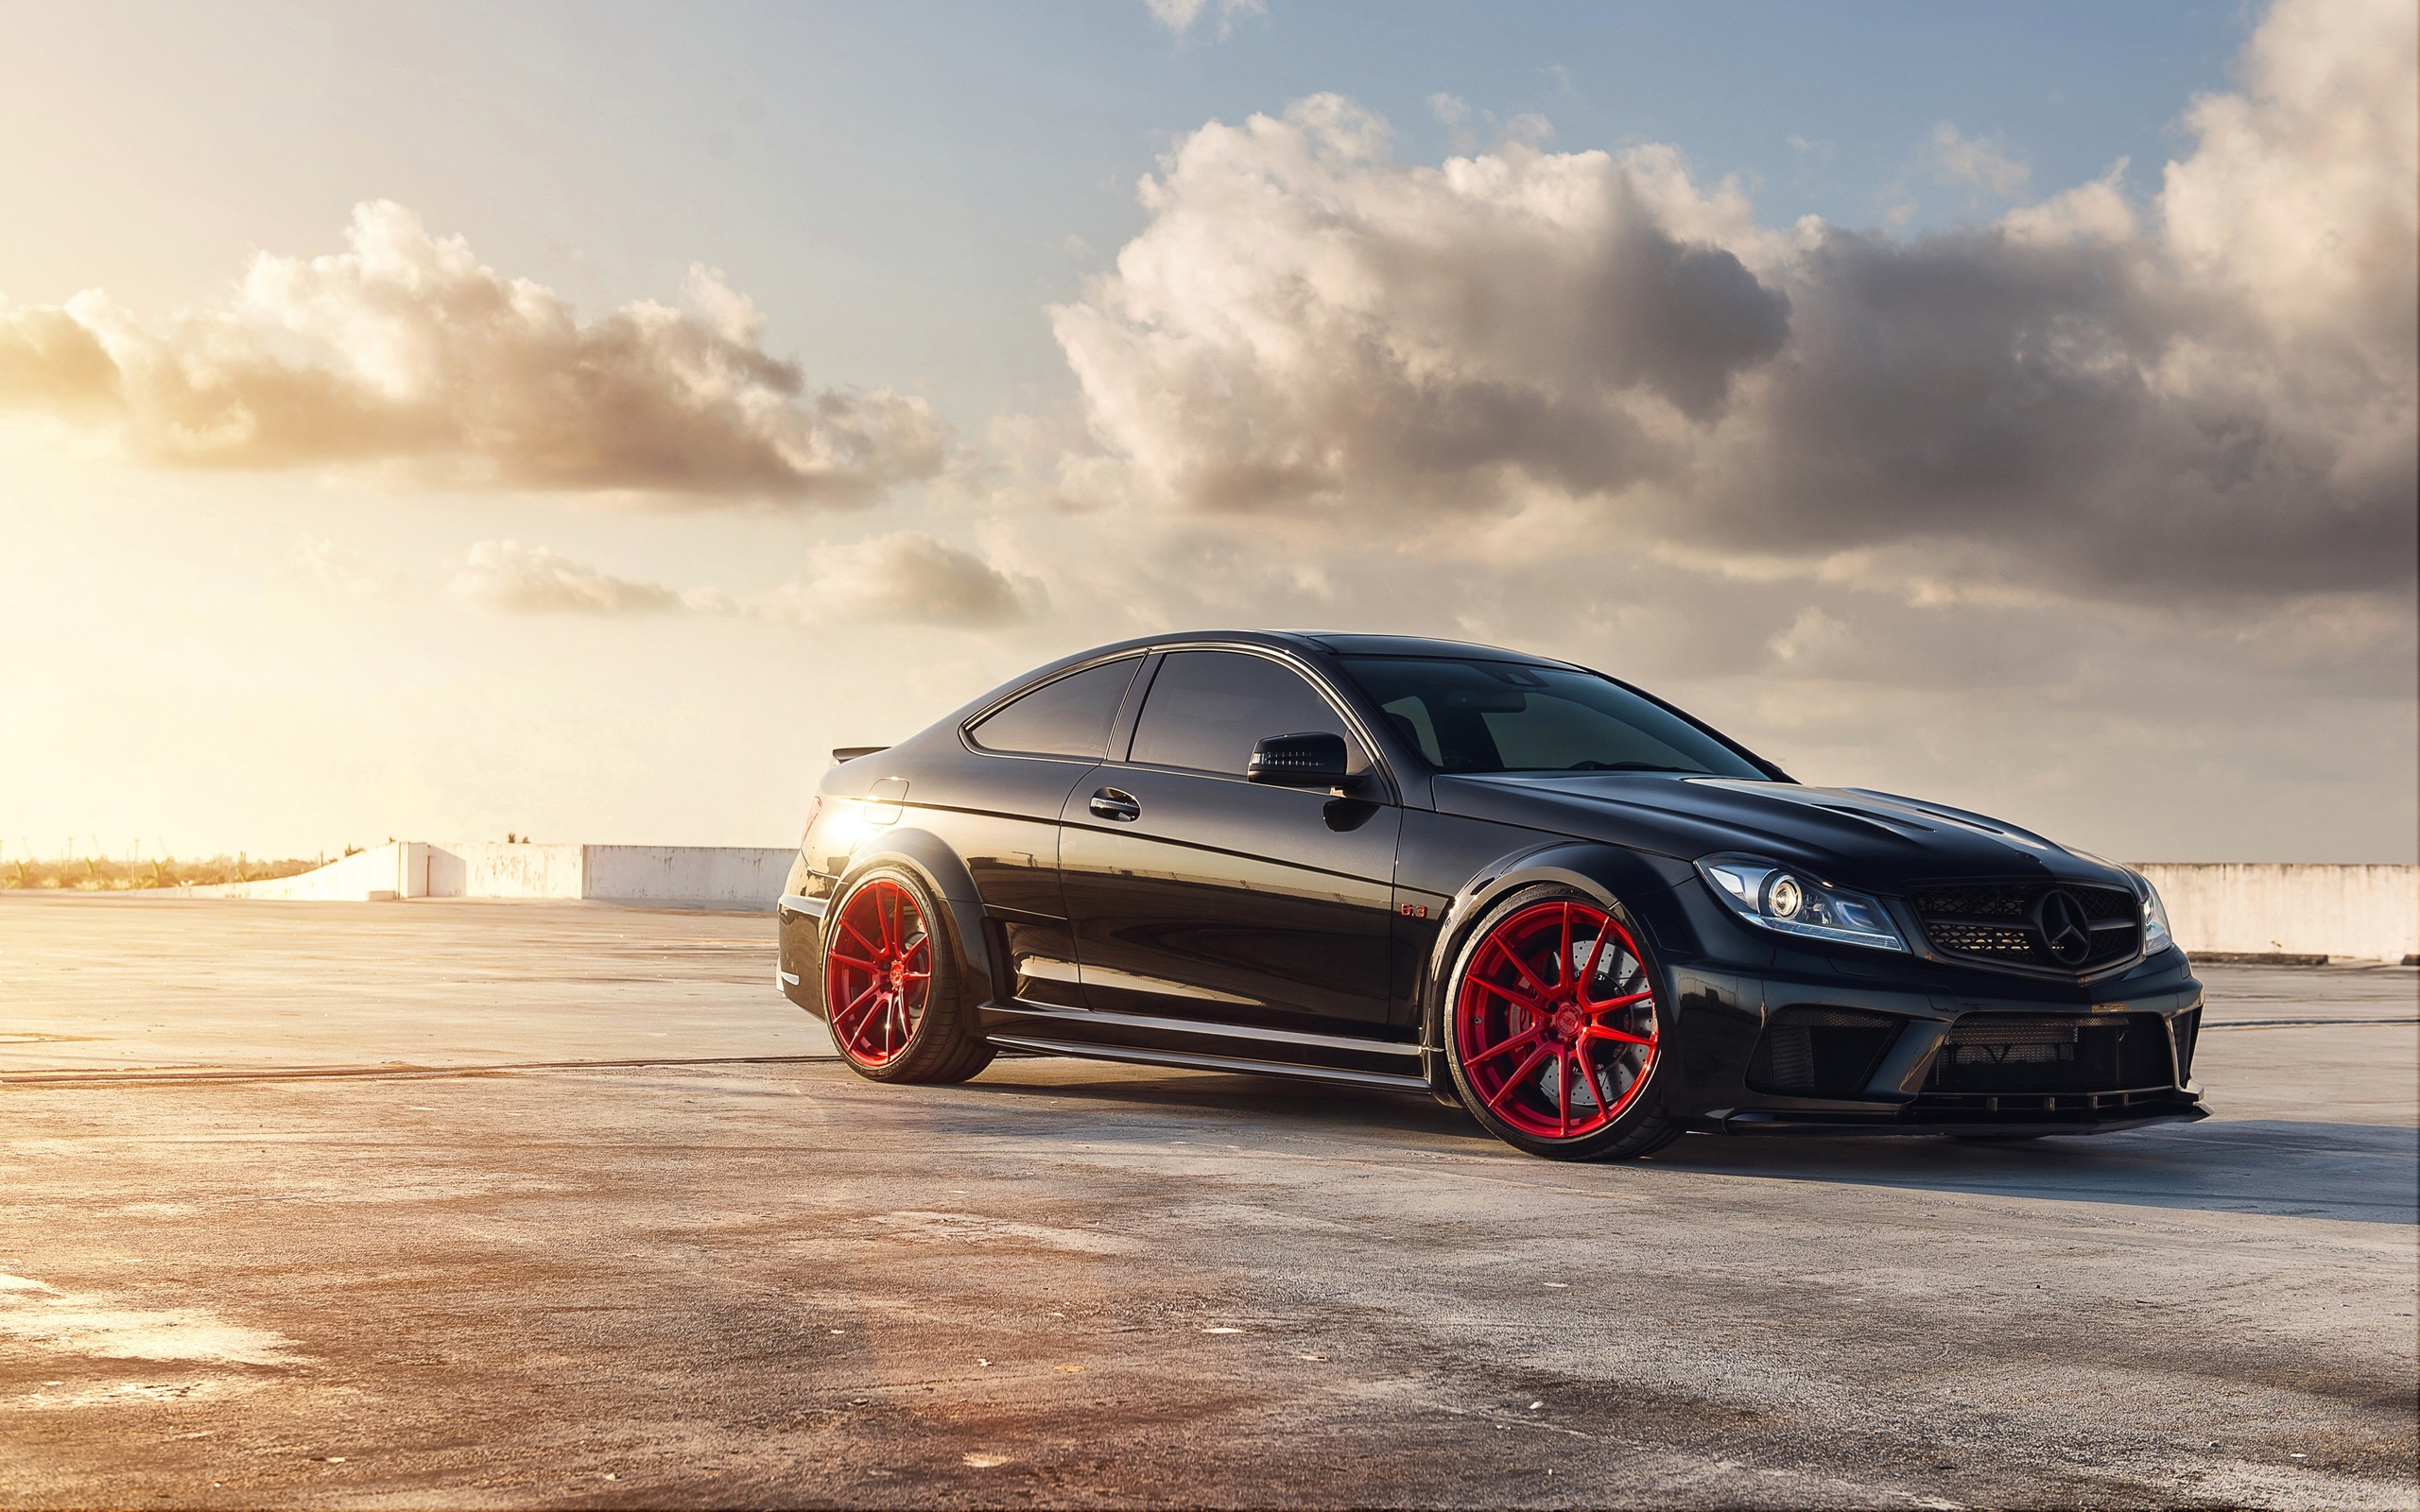 Mercedes Benz C63 AMG Wallpapers HD Wallpapers